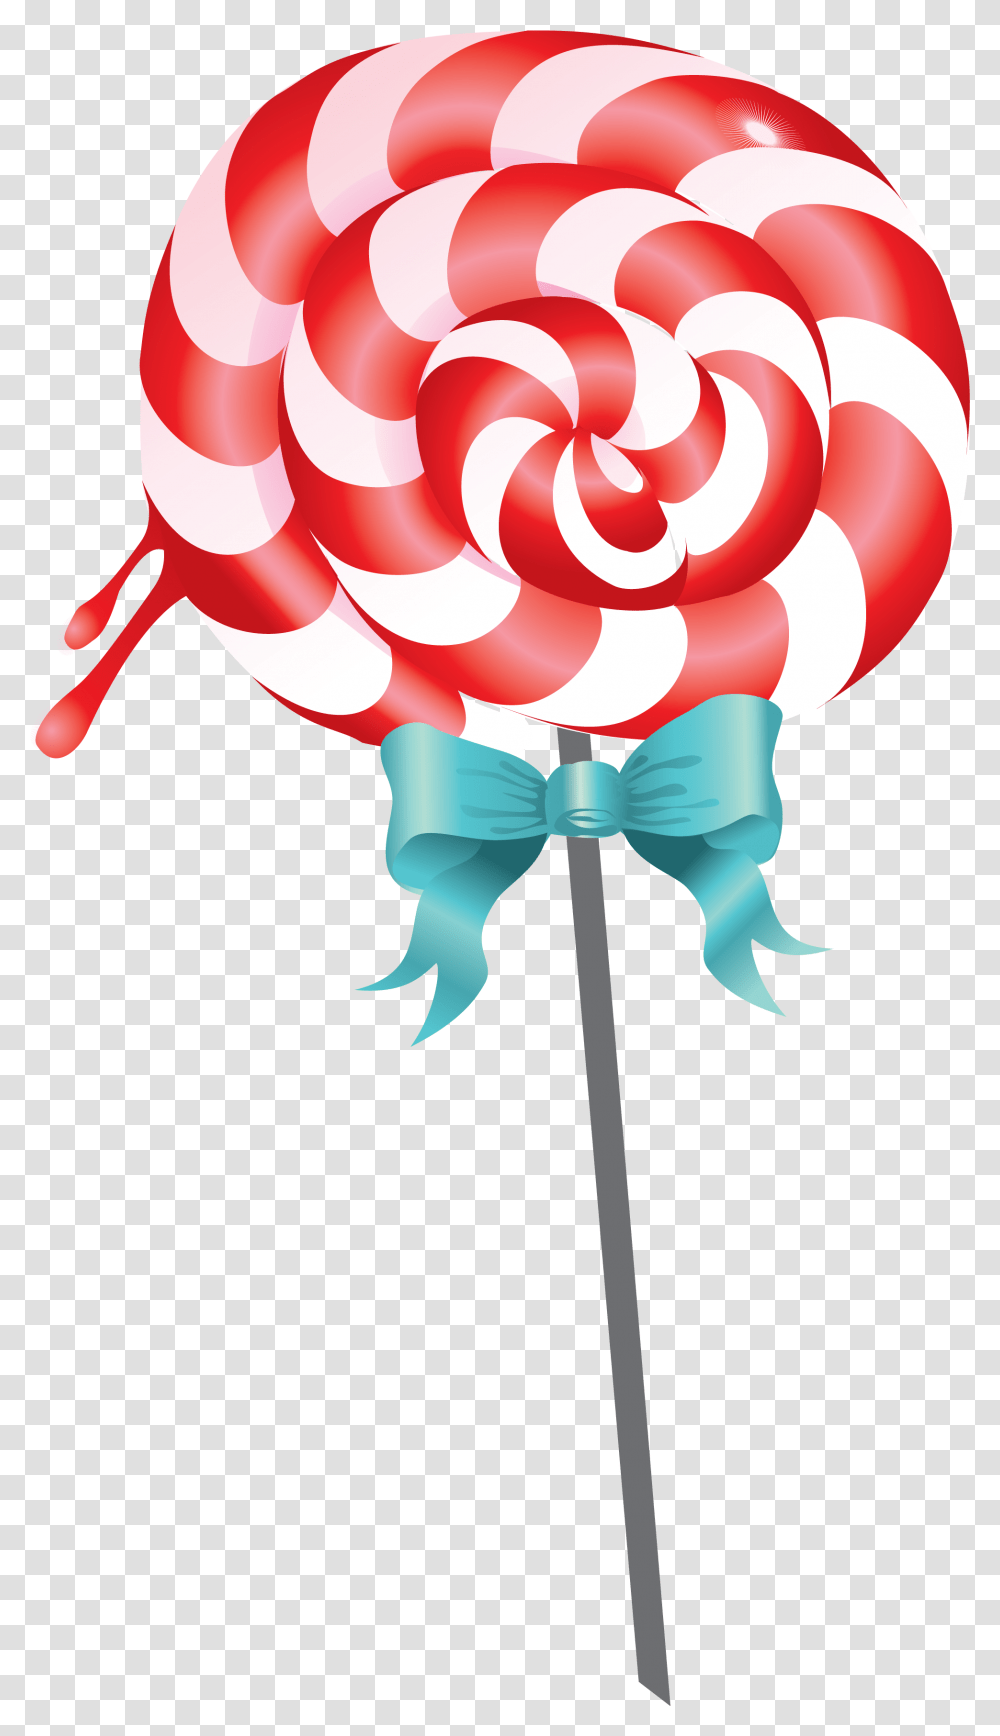 Lollipop Image Lollipop Background, Balloon, Food, Candy, Sweets Transparent Png